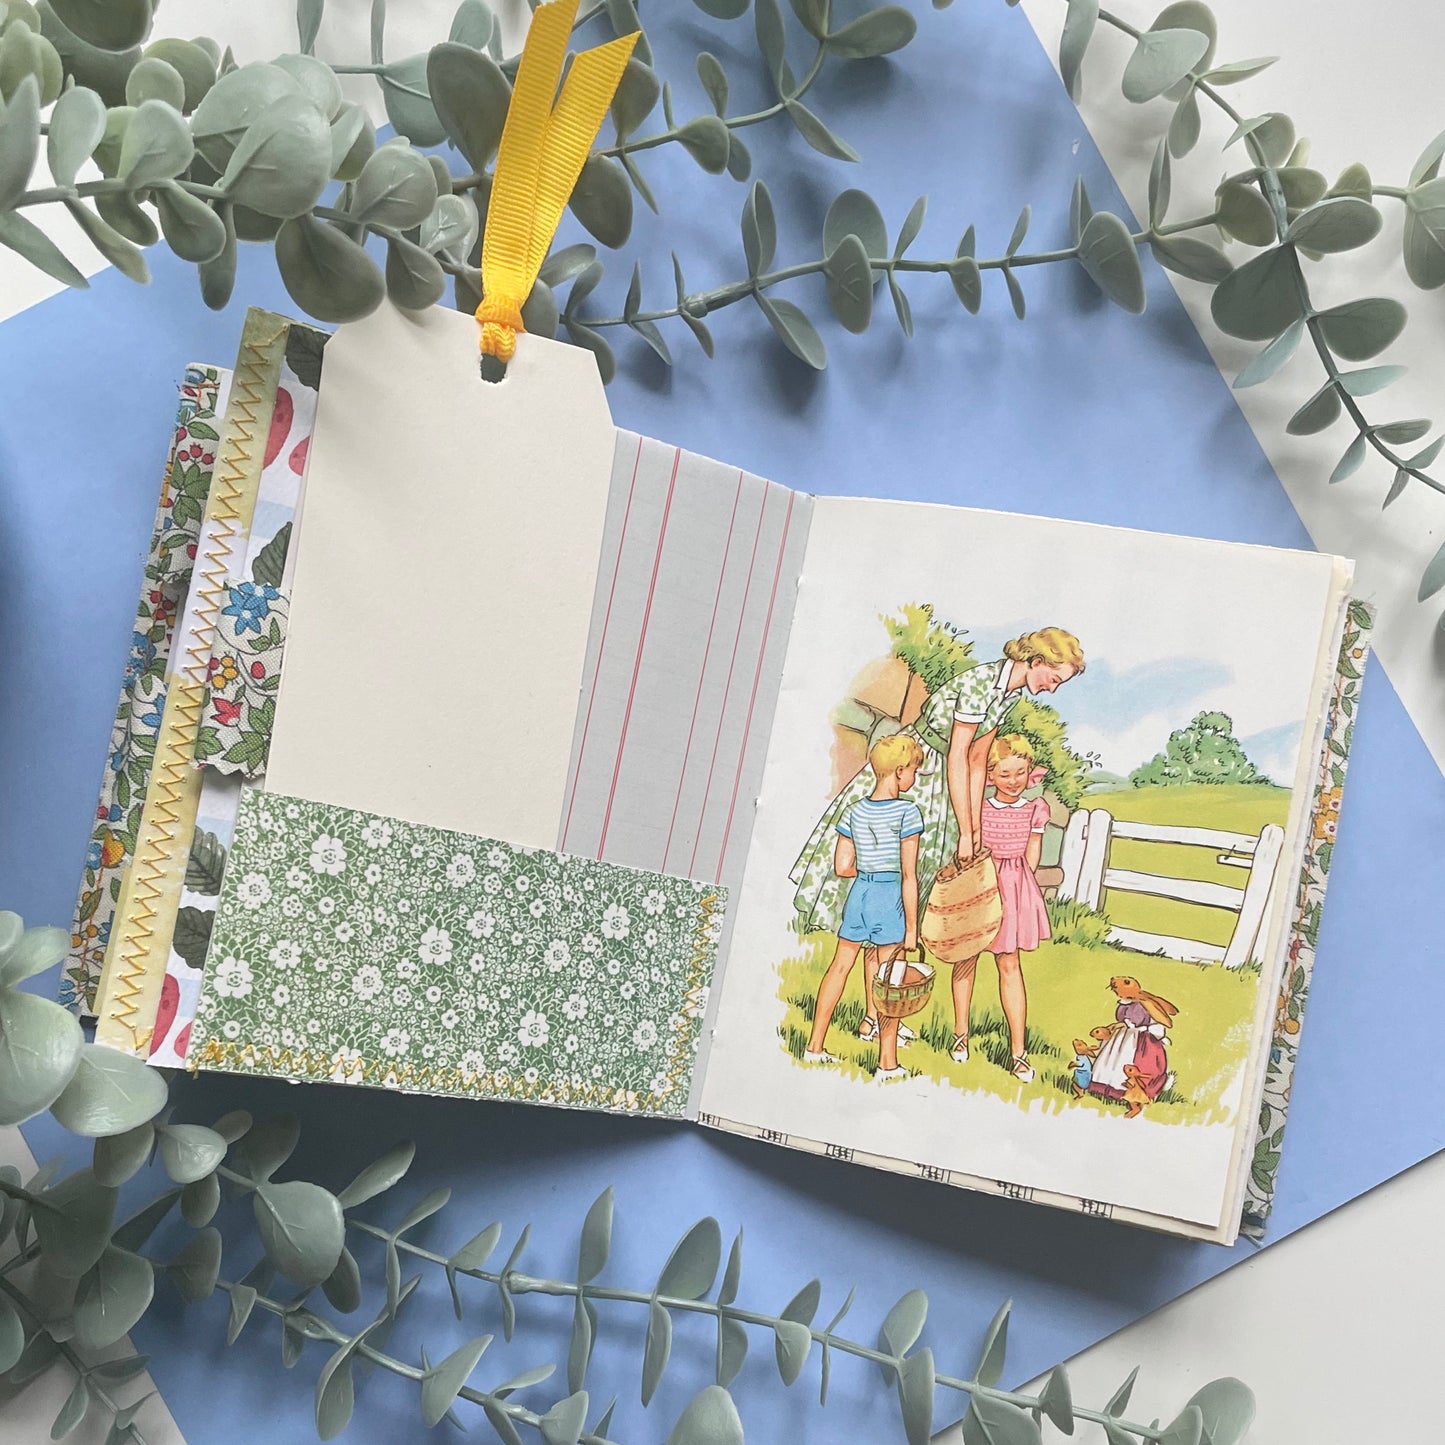 Handmade Soft Cover Upcycled Memory Keeping Journal - The Birthday Picnic at Blackberry Farm